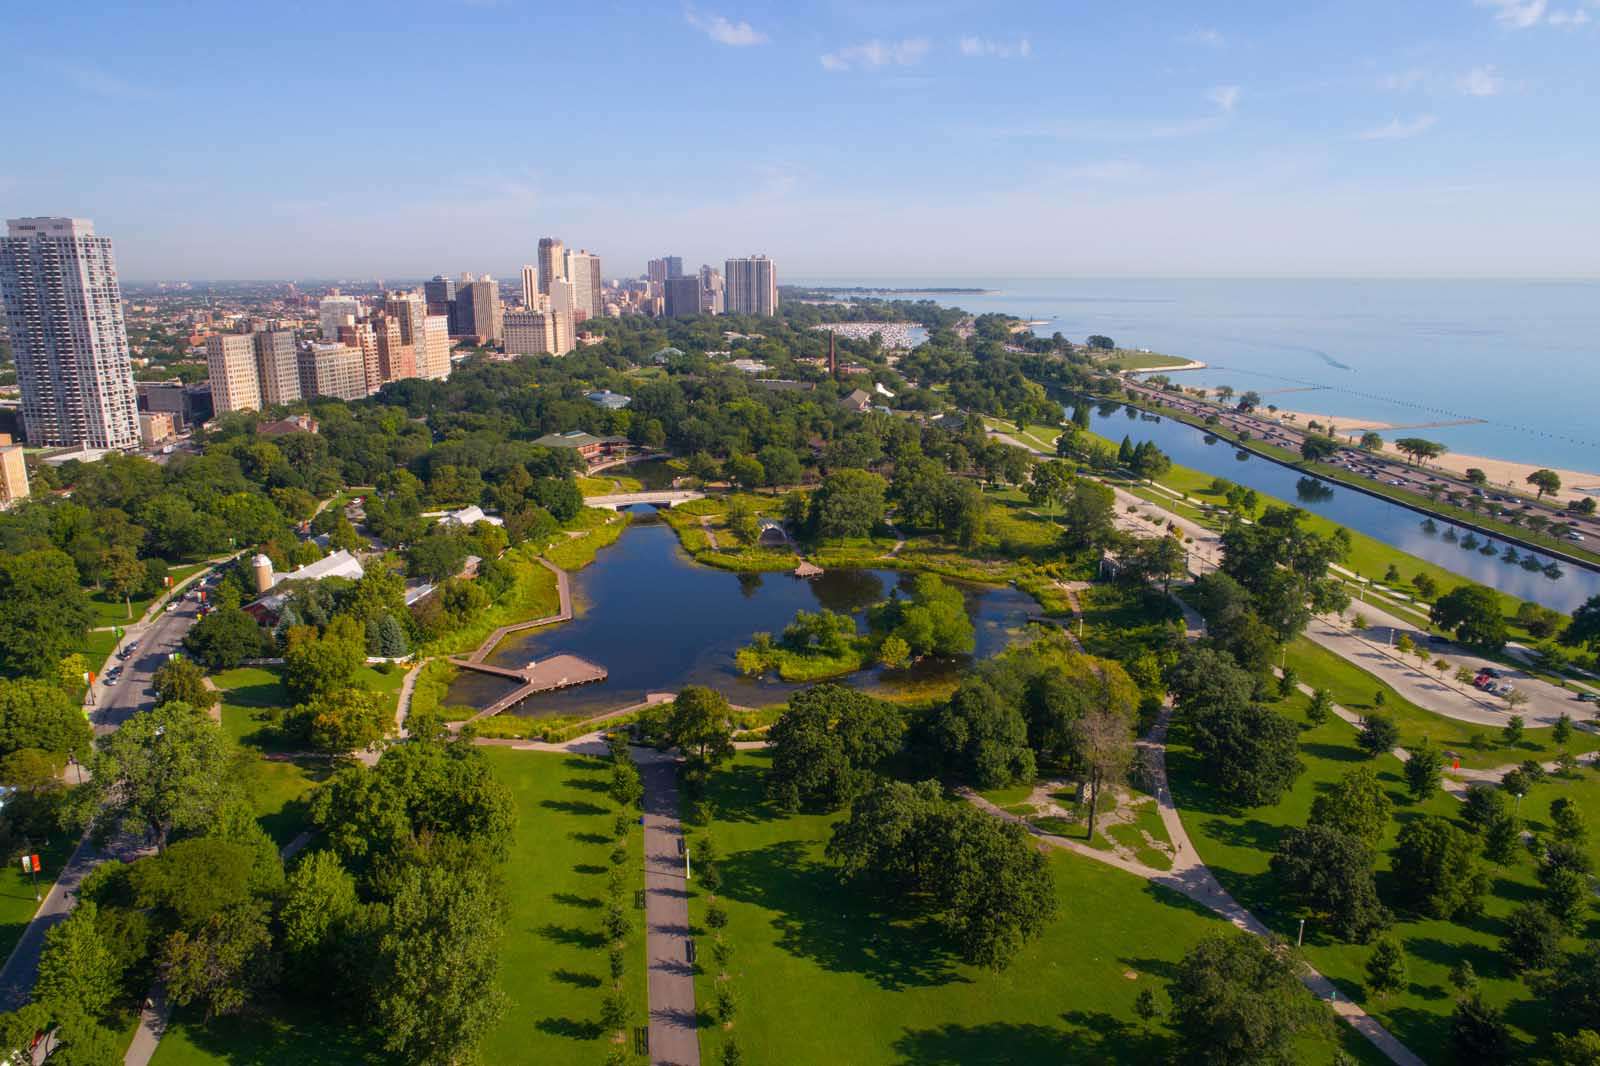 Where to stay in Chicago near Lincoln Park Zoo